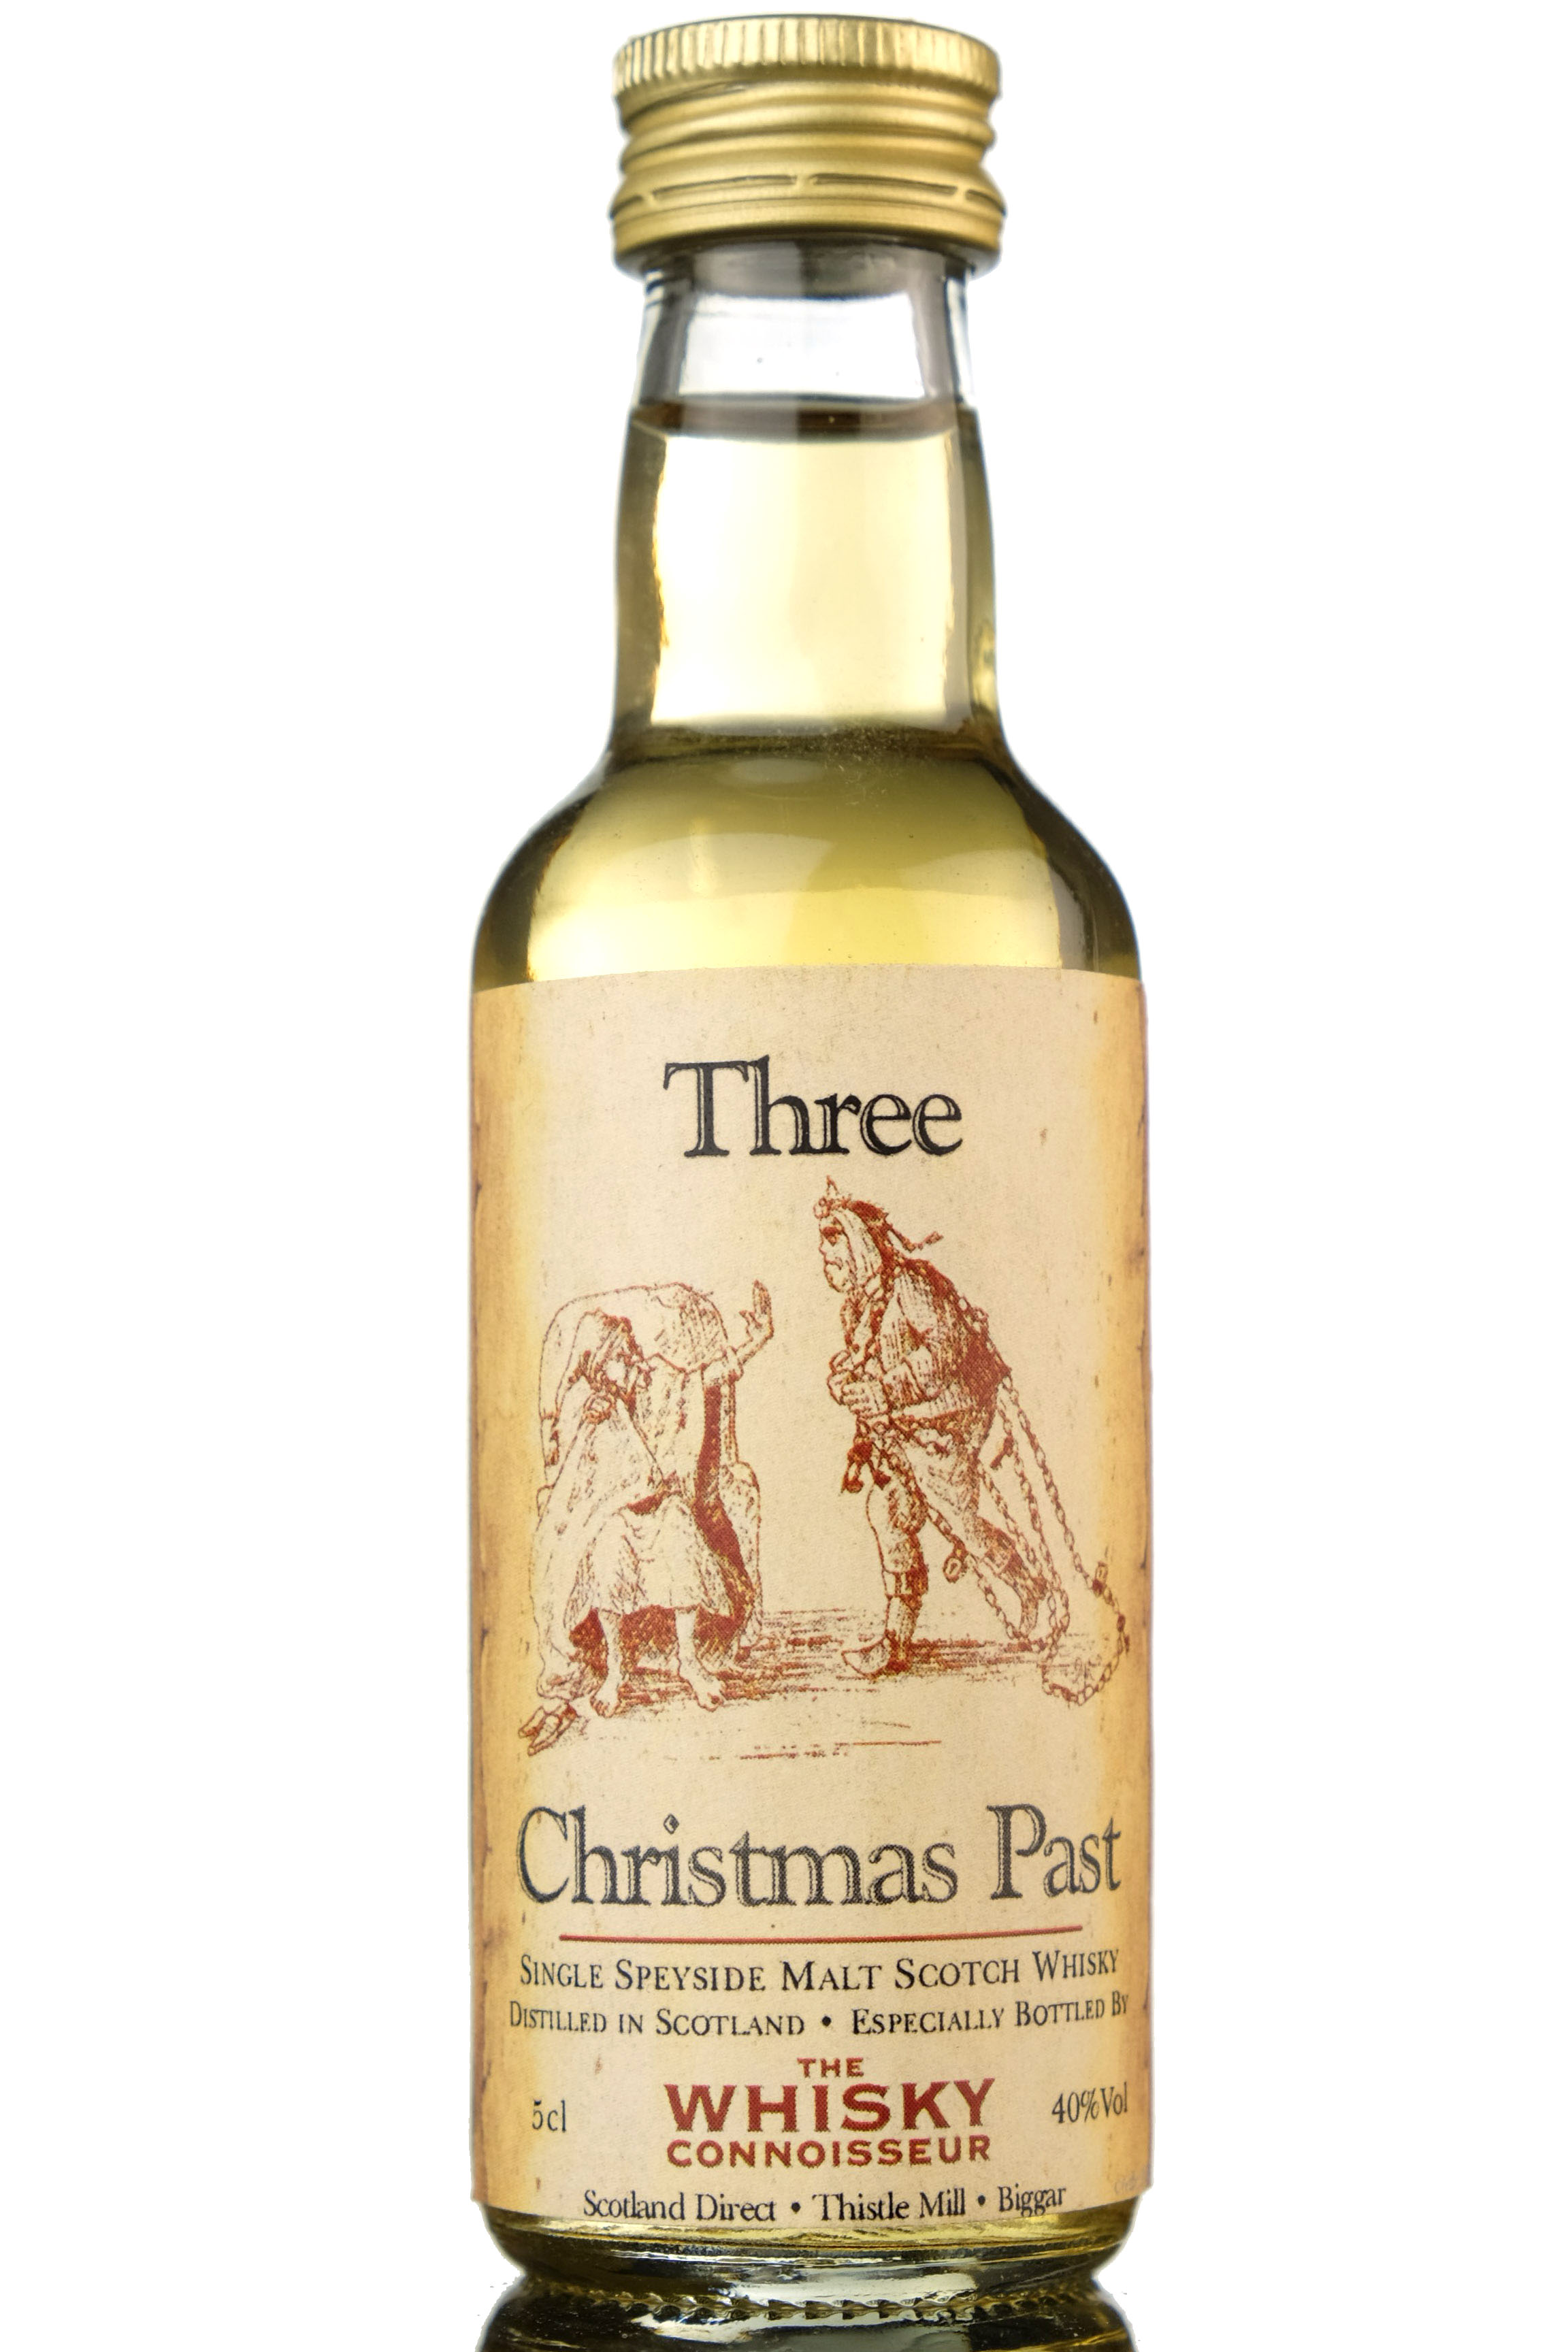 Three Christmas Past - The Whisky Connoisseur Miniature